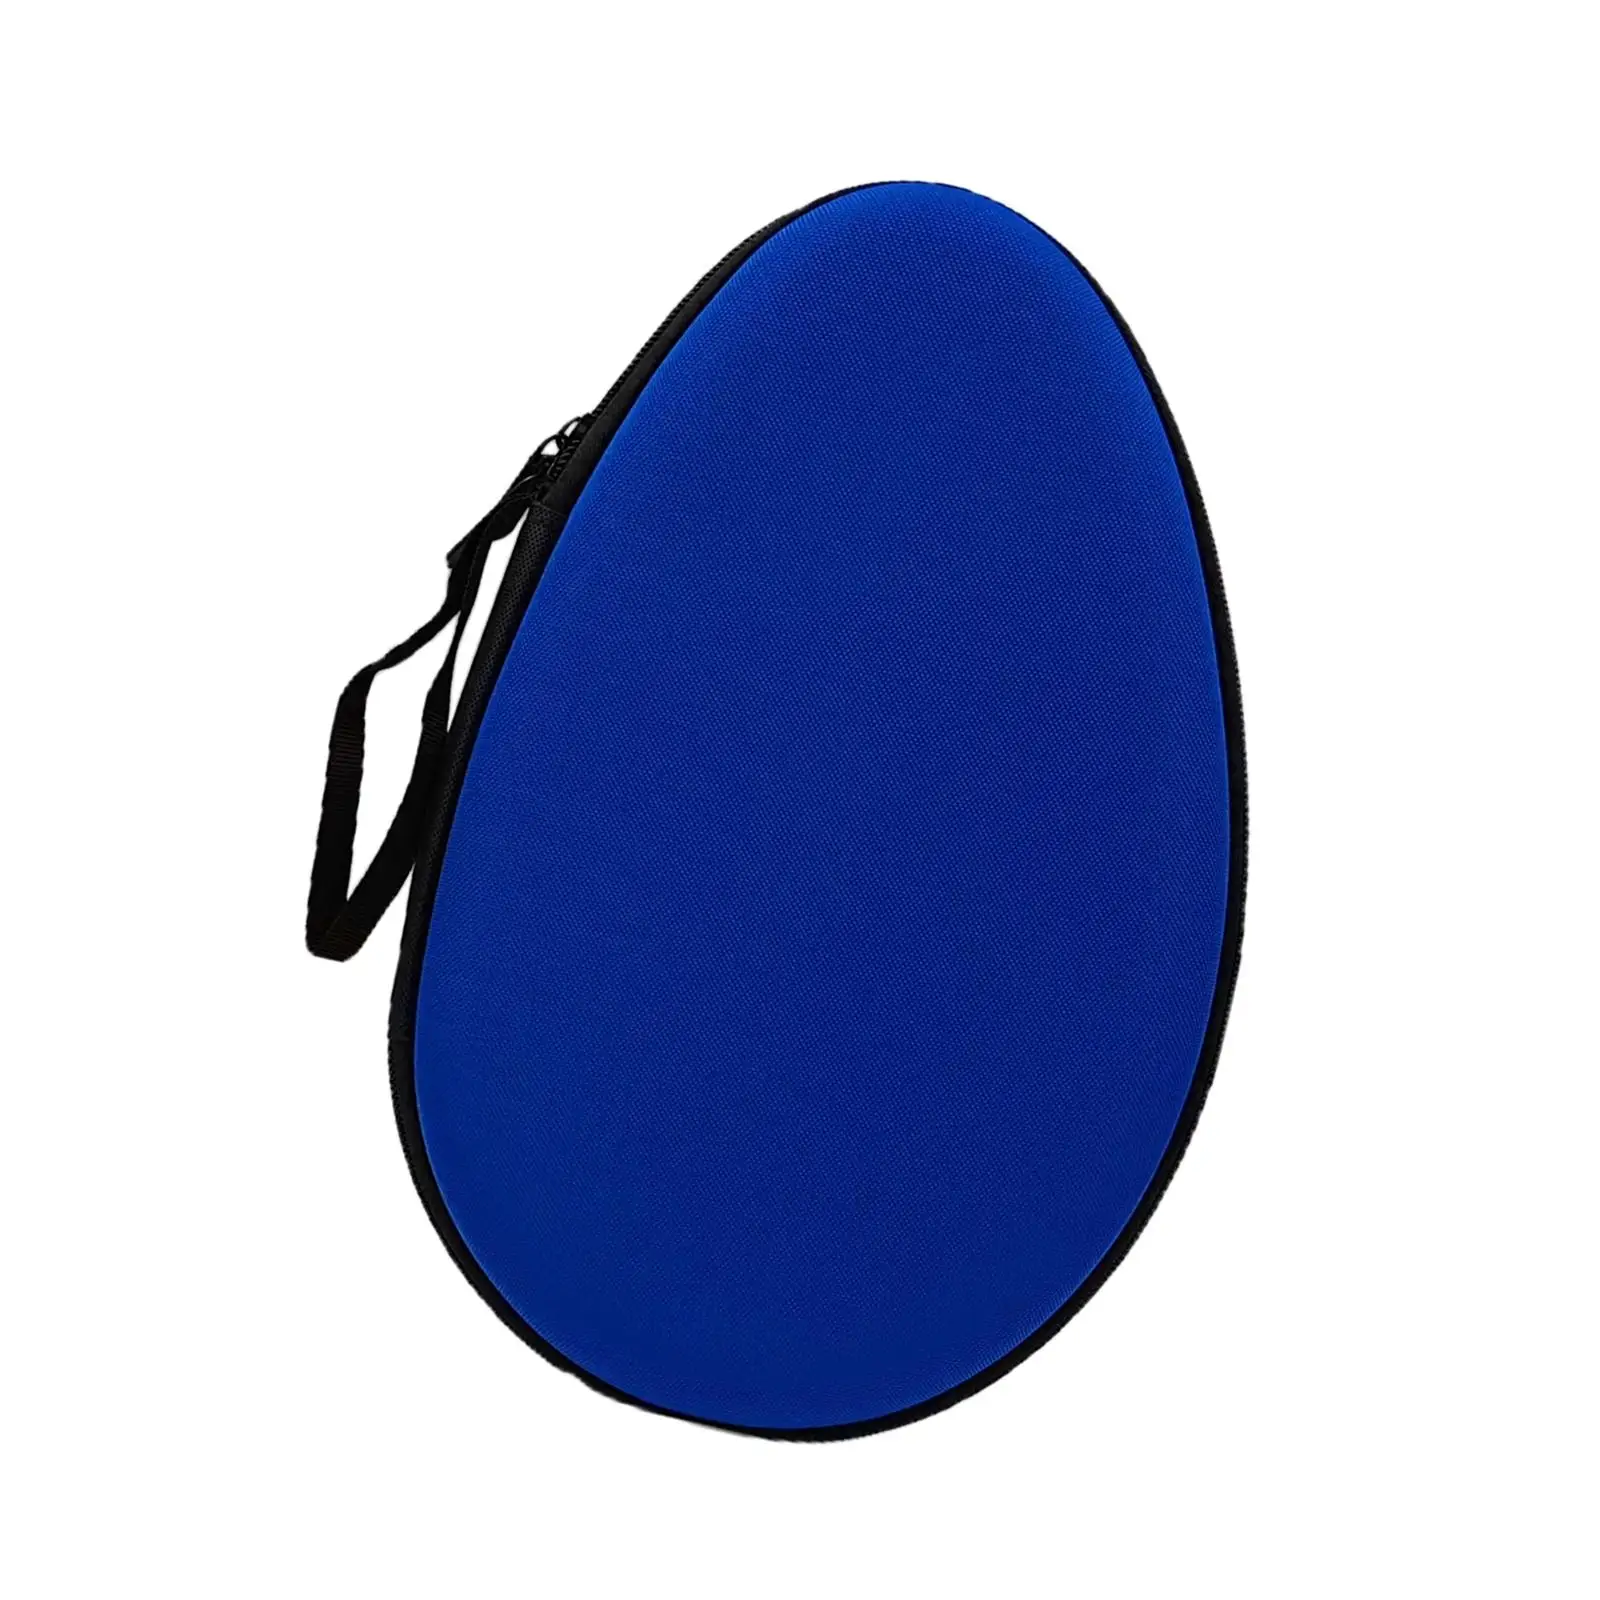 Multifunction Table Tennis Racket Bag with Zipper Ping Pong Paddle Bag for Travel